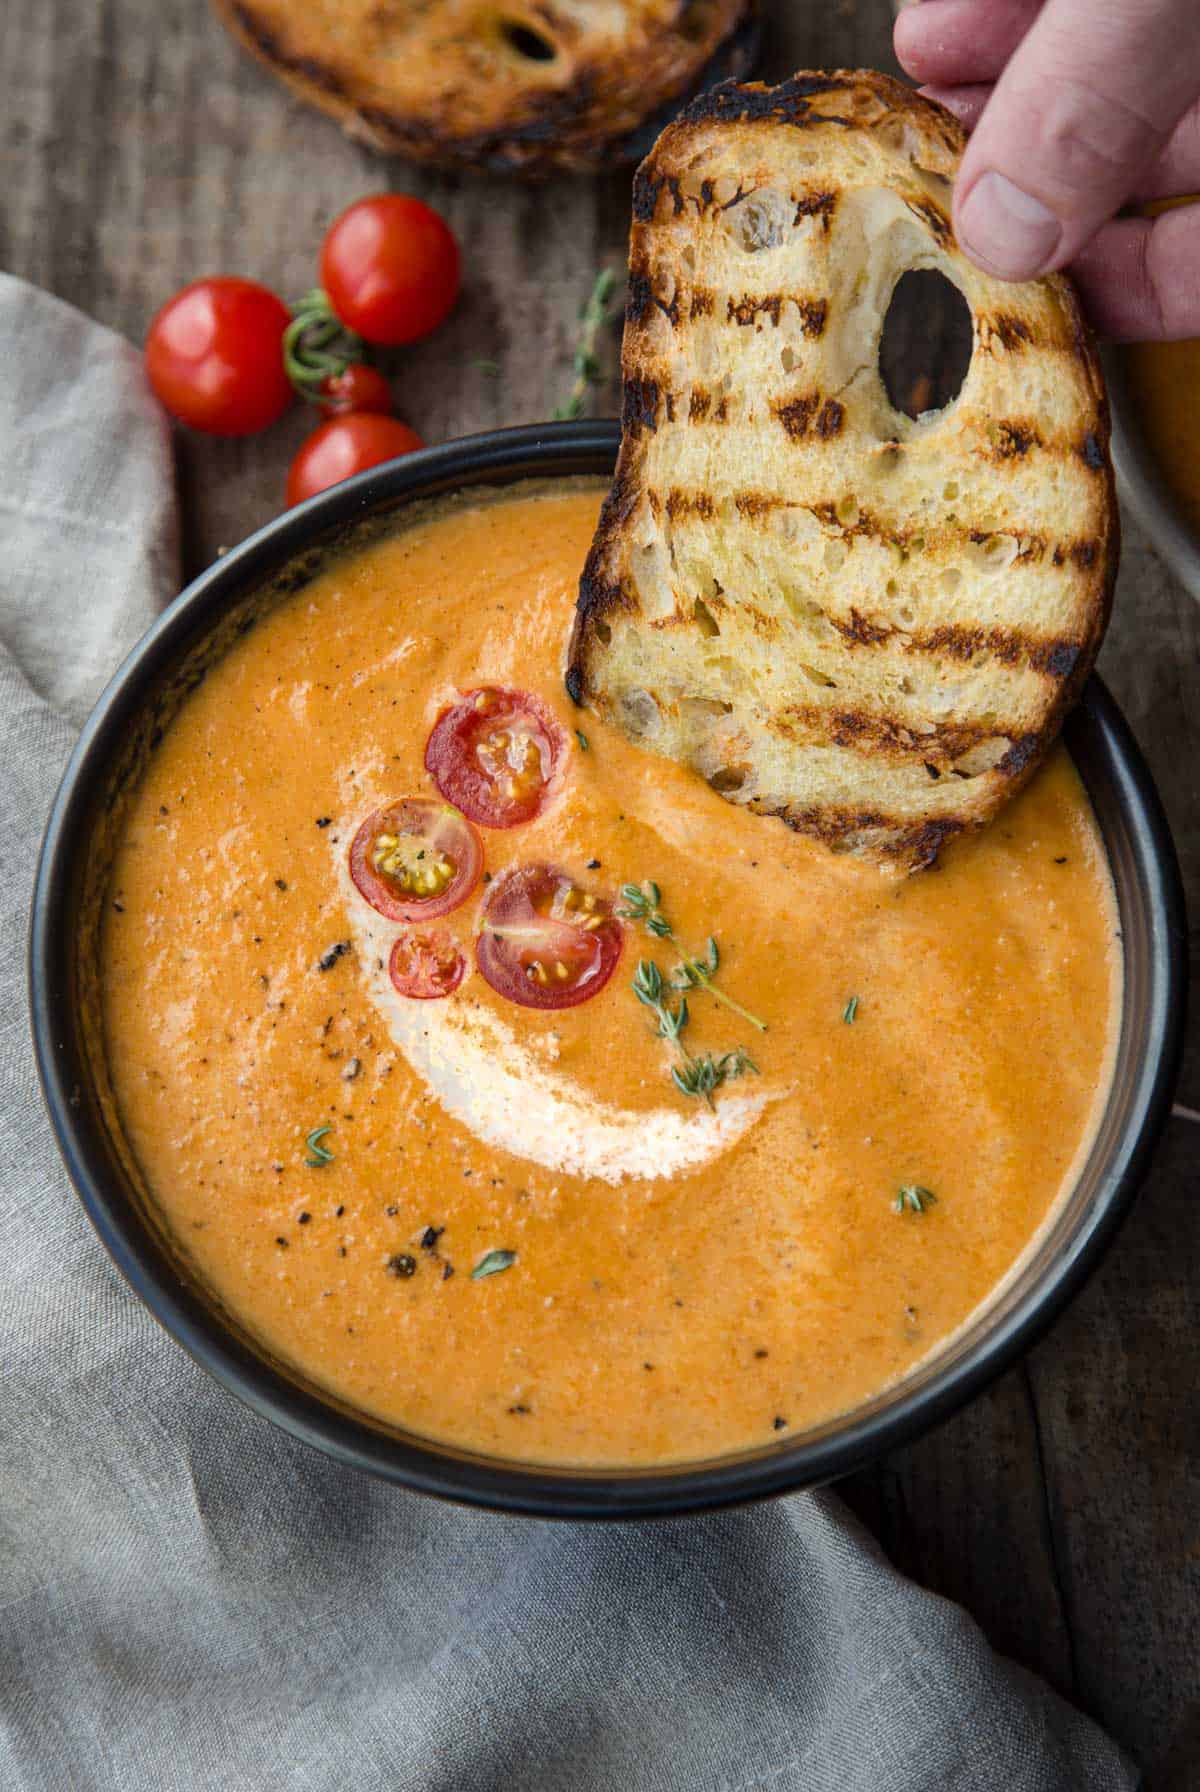 A bowl of smoked tomato bisque and toasted bread dipping into the soup